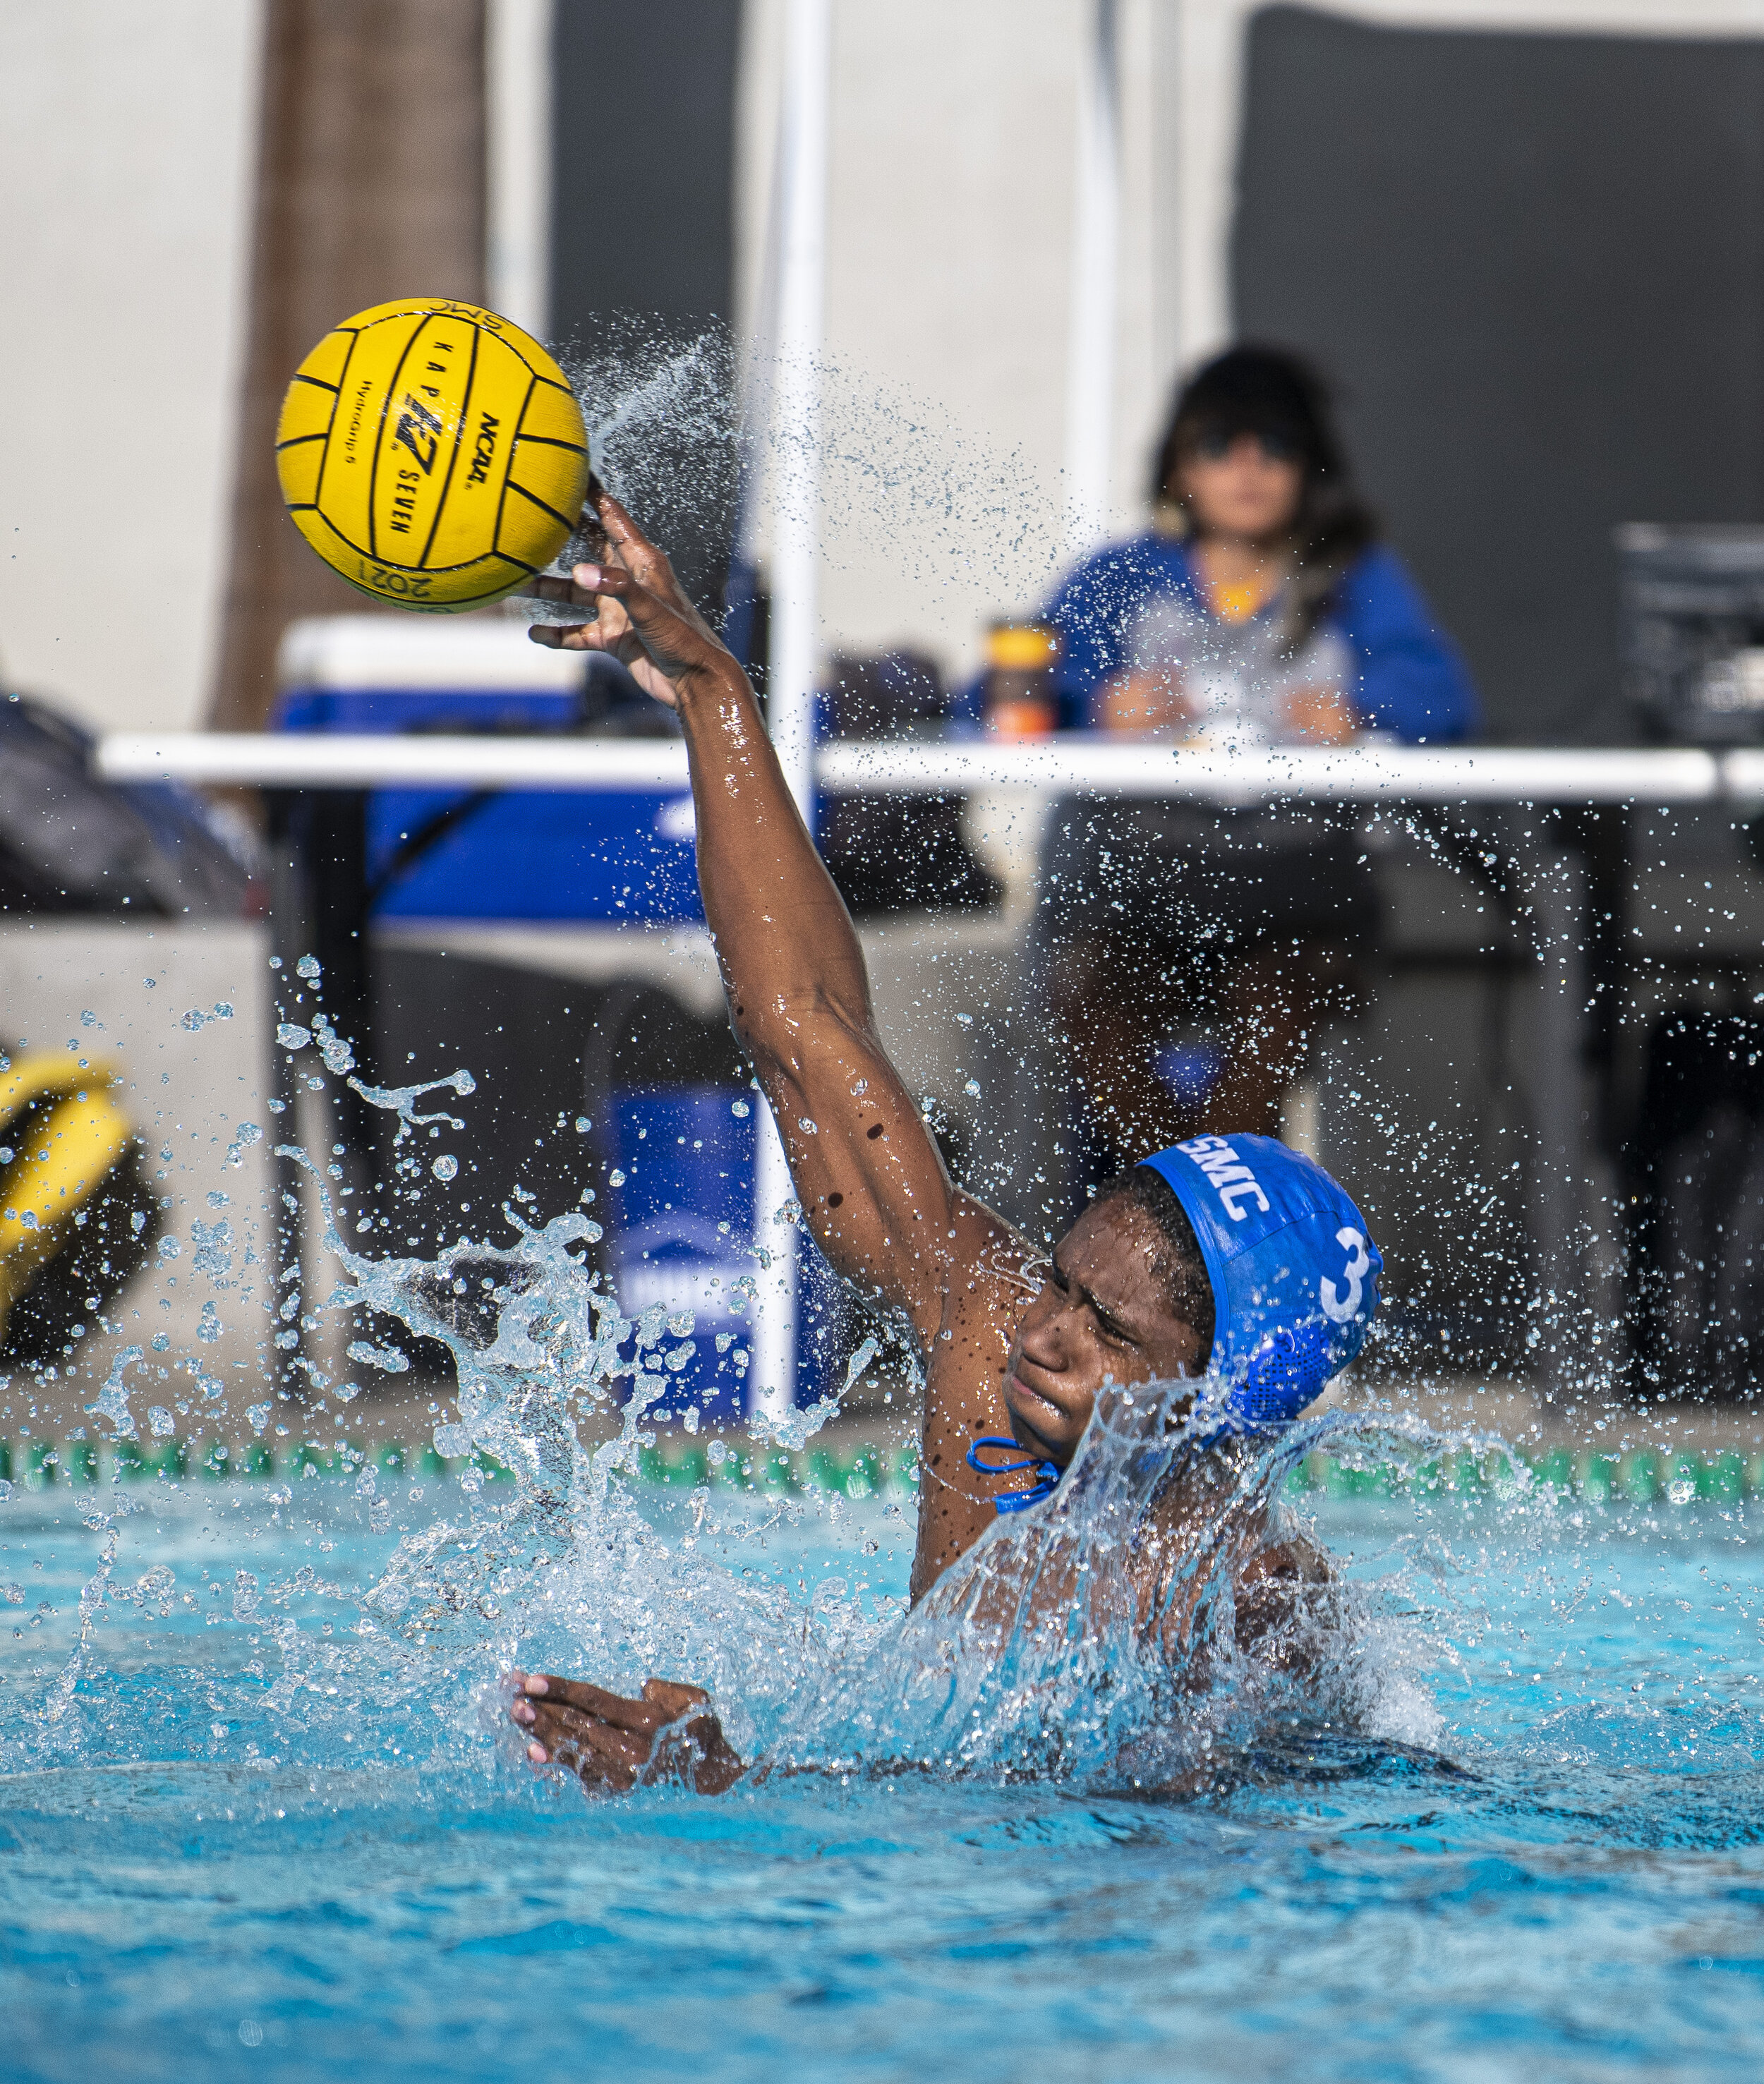  Santa Monica College Corsairs freshman Mikhai Davis (3) makes a shot attempt on goal after trailing by 2 after the half with a score 8-6 in favor of Ventura College. (Jon Putman | The Corsair) 